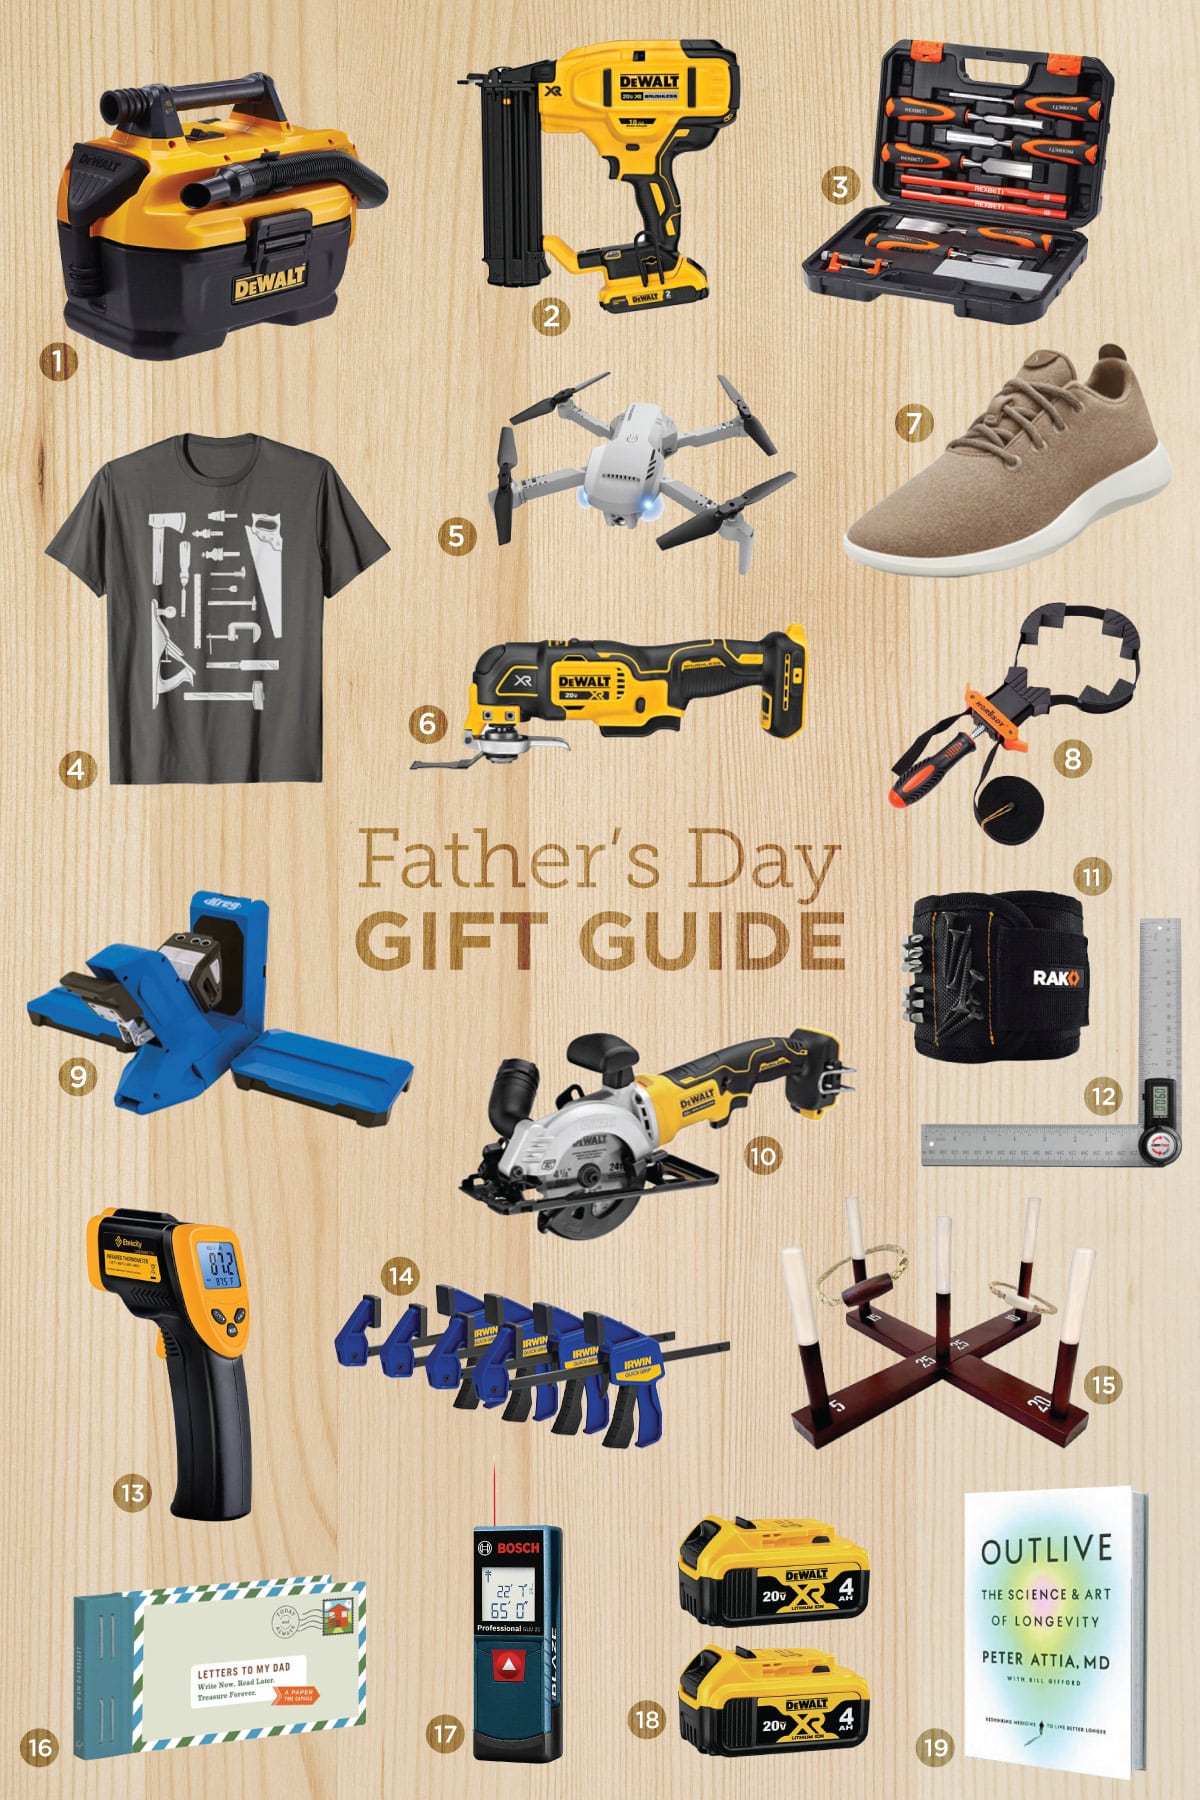 2023 Holiday Gift Guide: for Him & Her - Jenna Sue Design